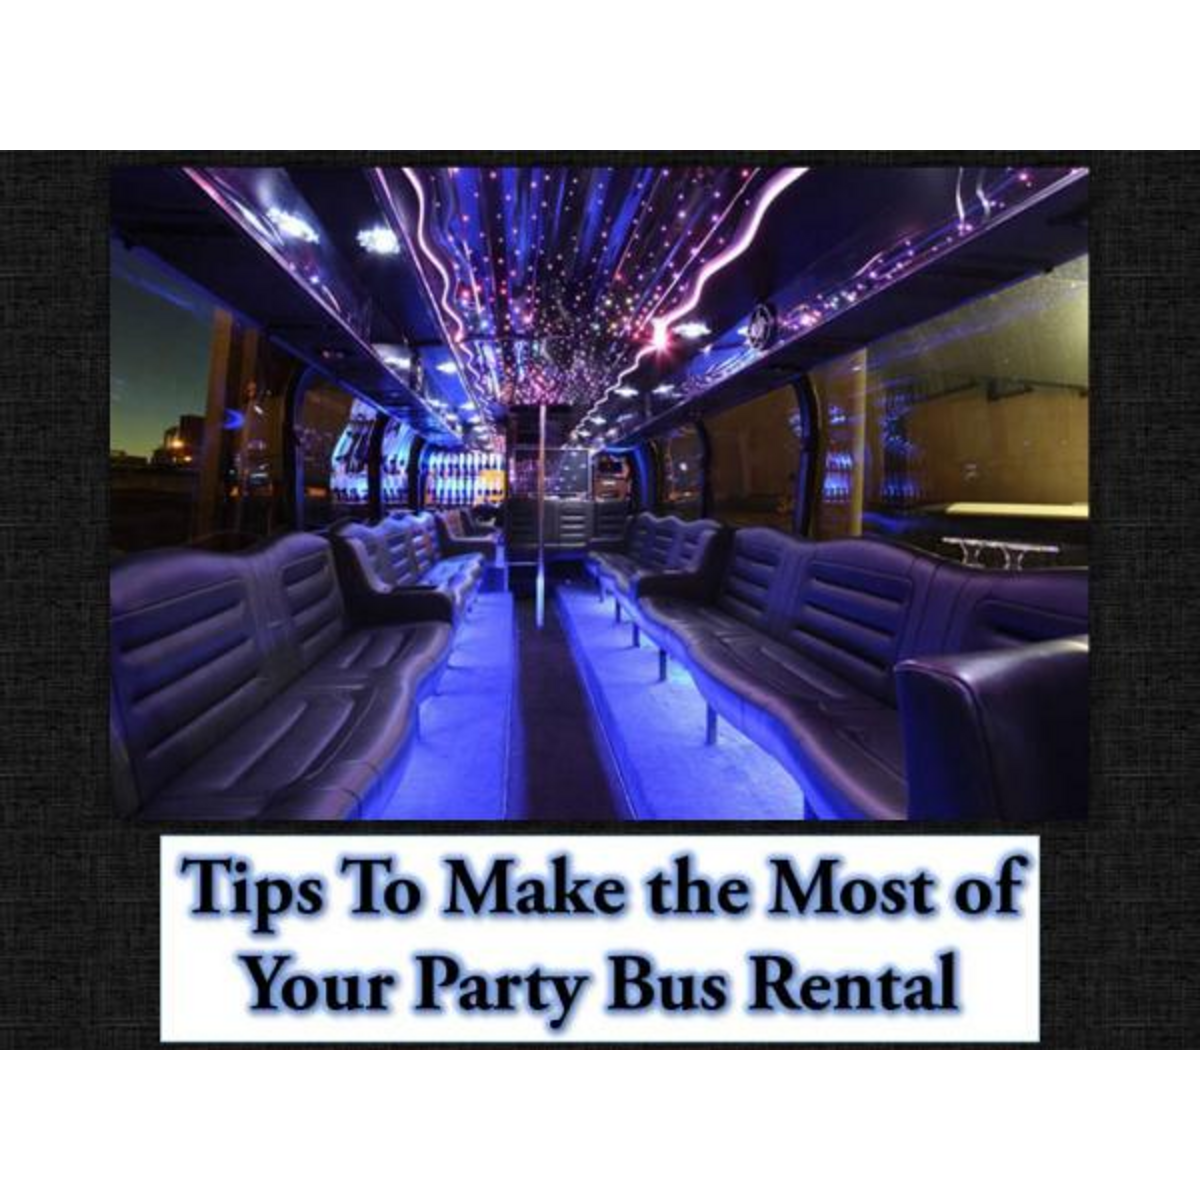 Tips To Make The Most Of Your Party Bus Rental Tips To Make The Most Of Your Party Bus Rental